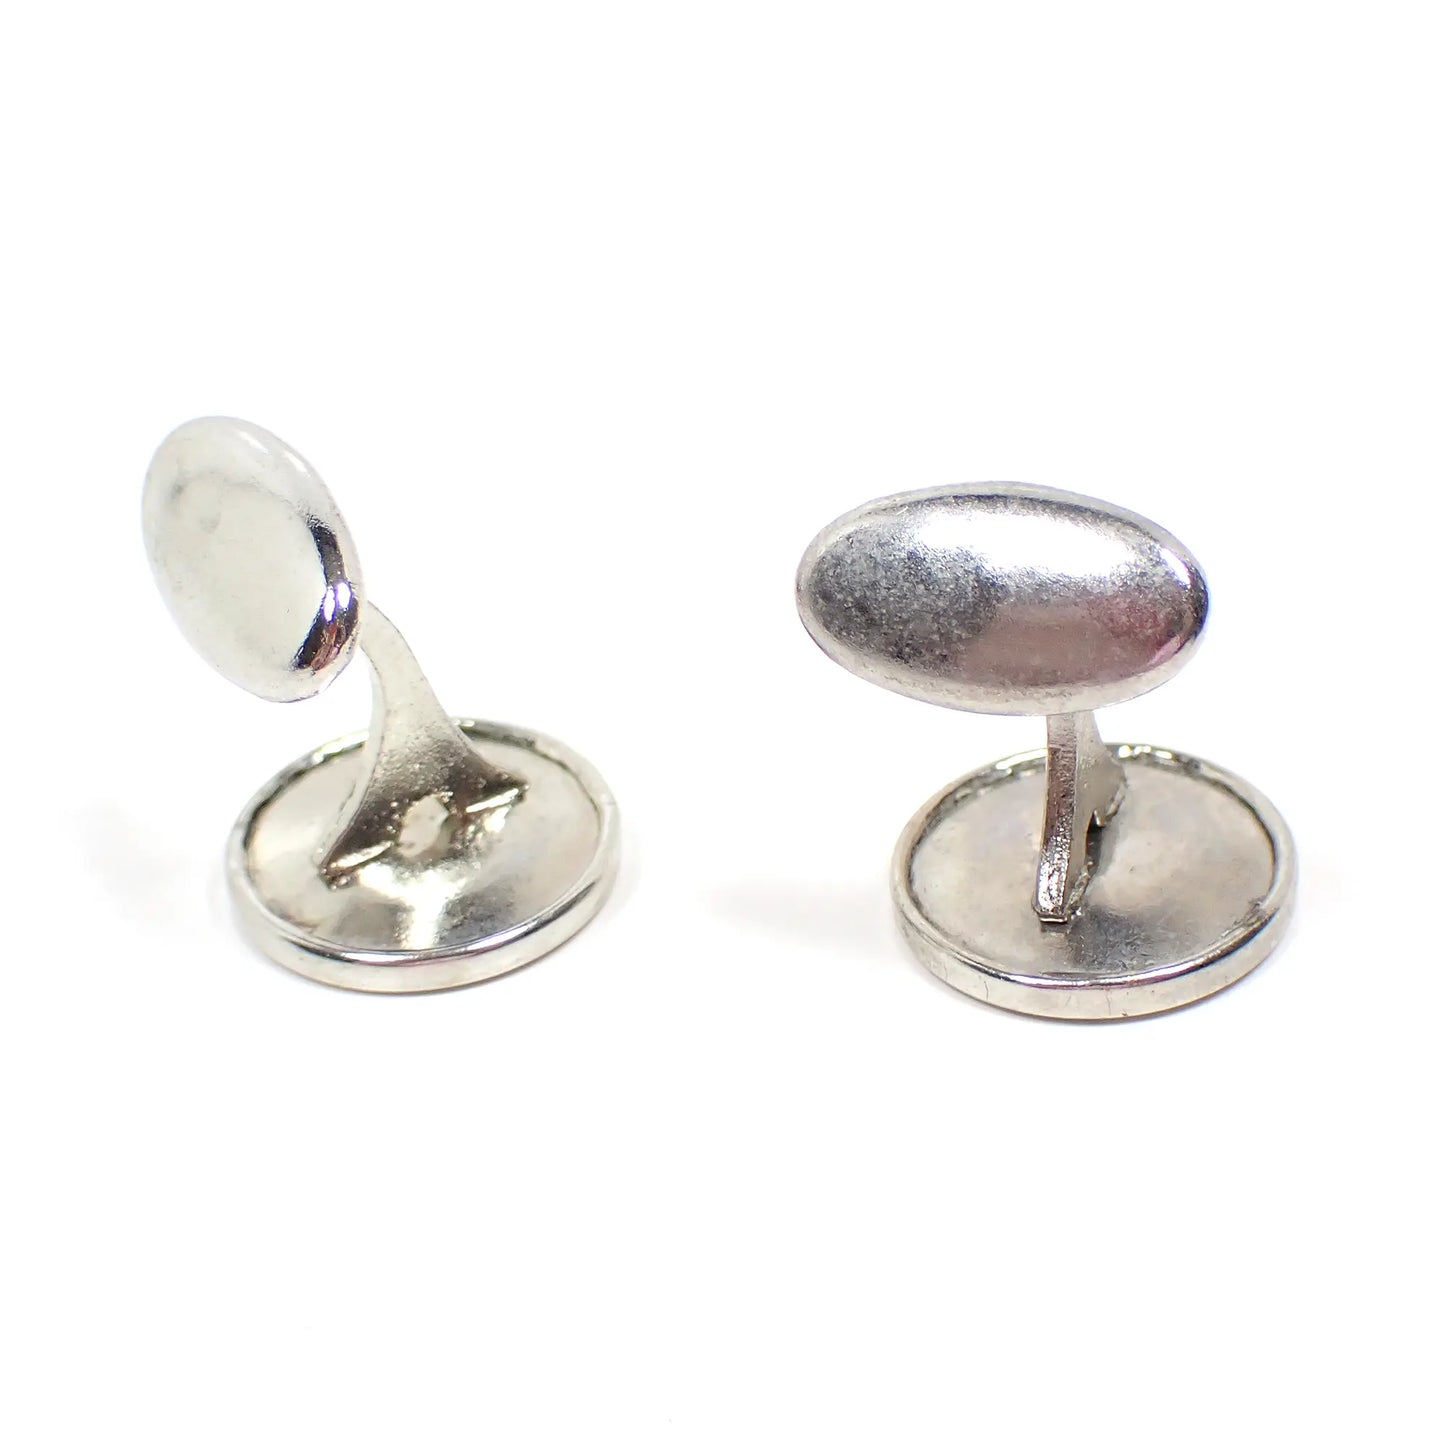 1930's Round Bean Back Vintage Cufflinks, Silver Tone, Angled Cuff Links